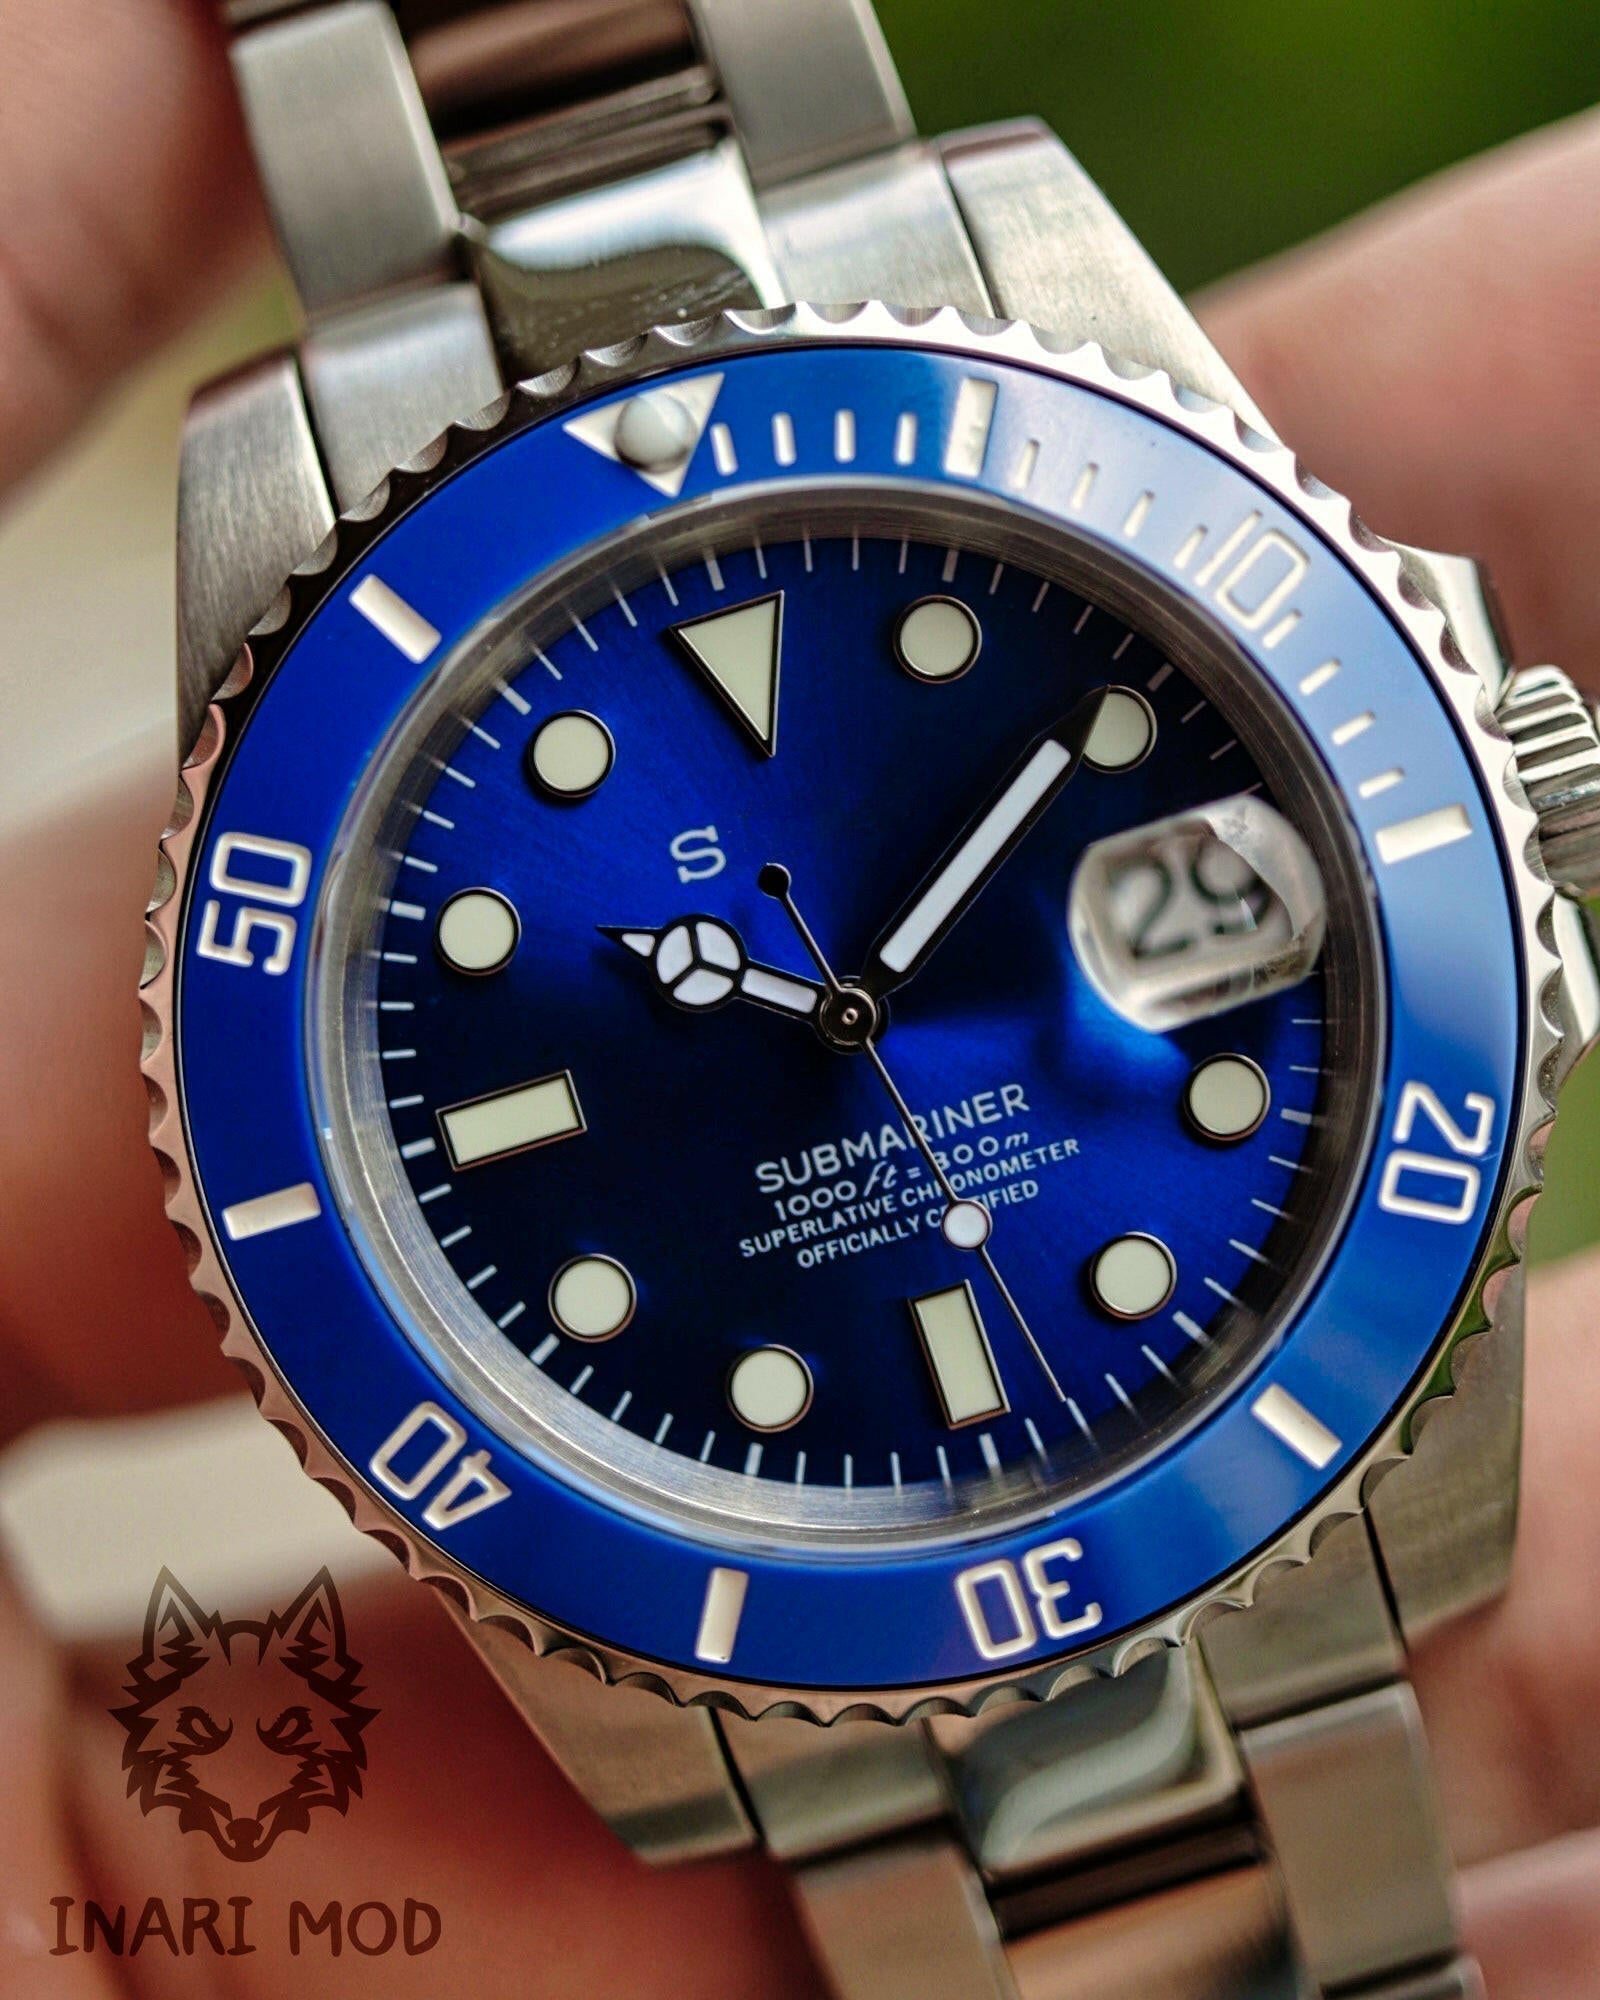 Seiko Mod Submariner Blue from Inarimod for 229.90